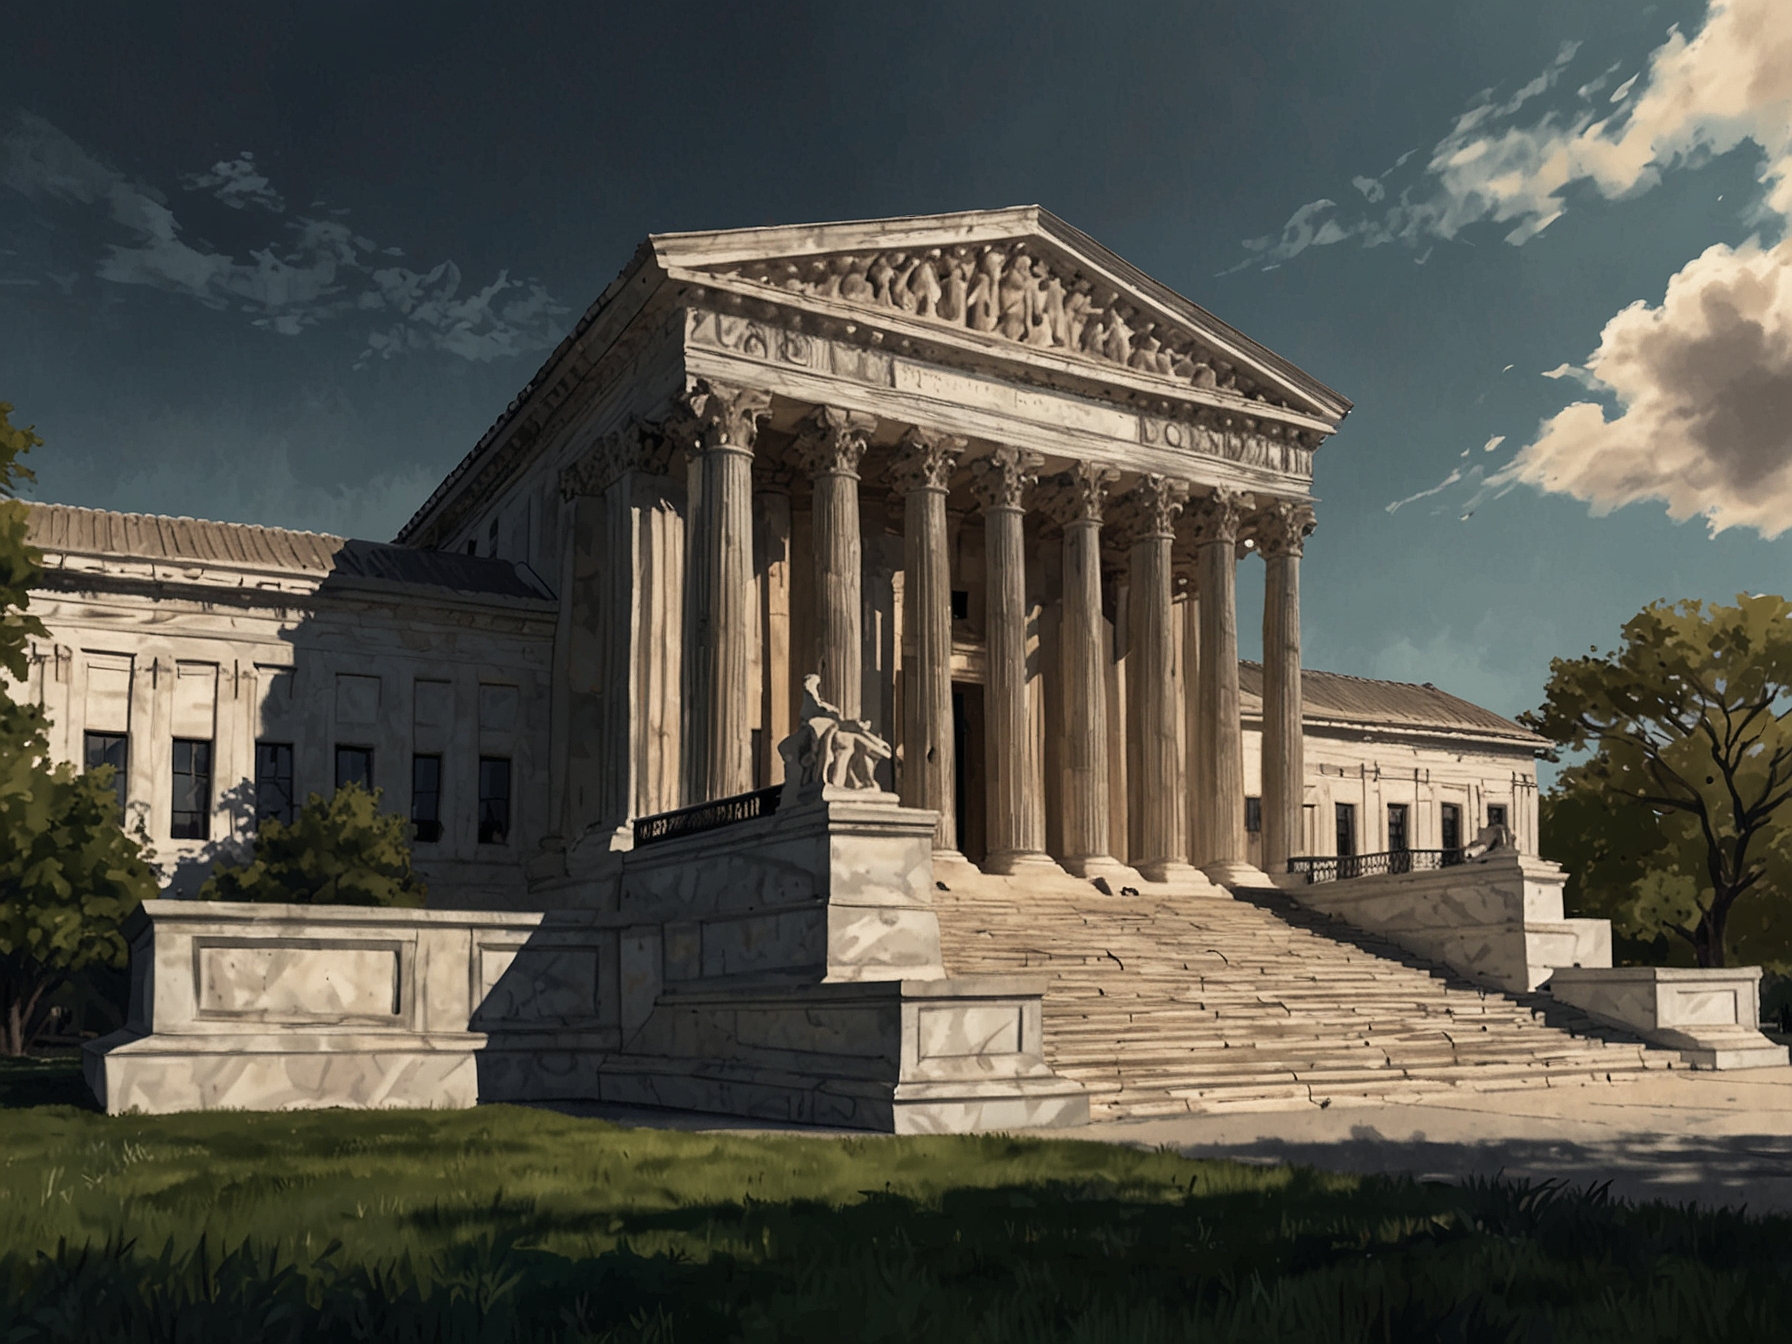 A somber view of the Supreme Court building in Washington D.C., symbolizing the gravity and controversy surrounding AOC's call for impeachment and judicial reform.